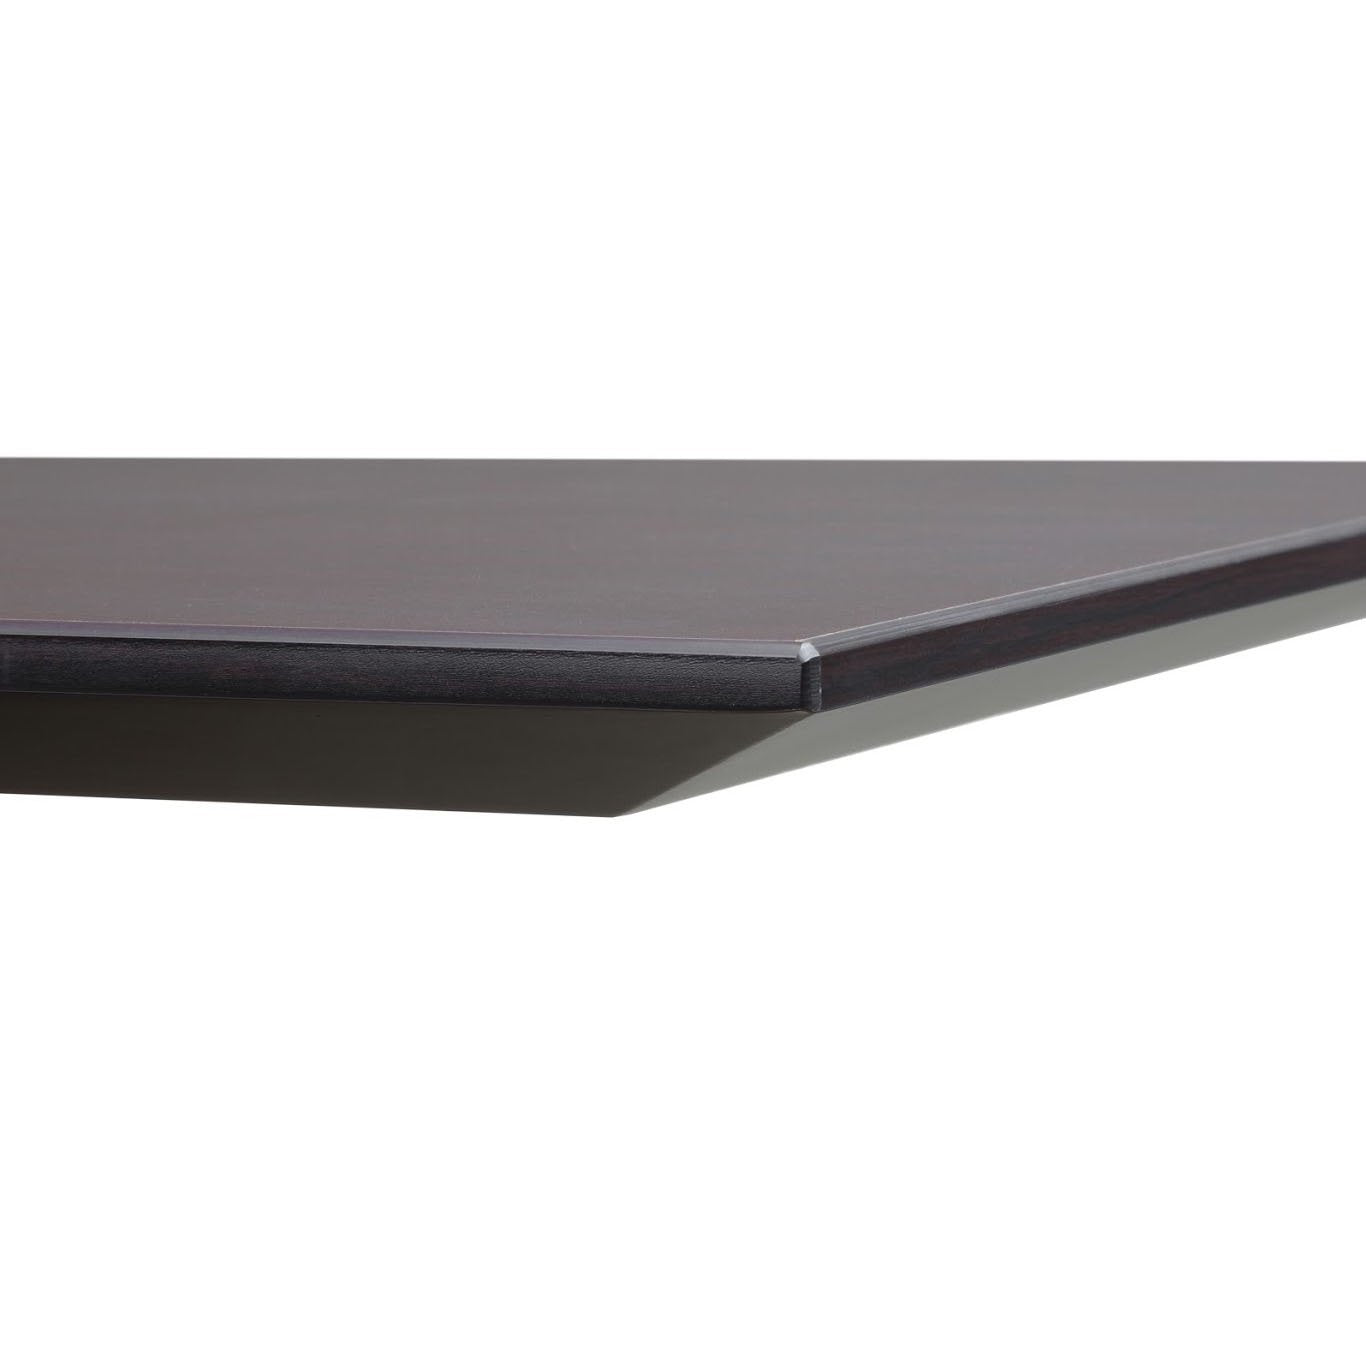 Espresso beveled conference table top